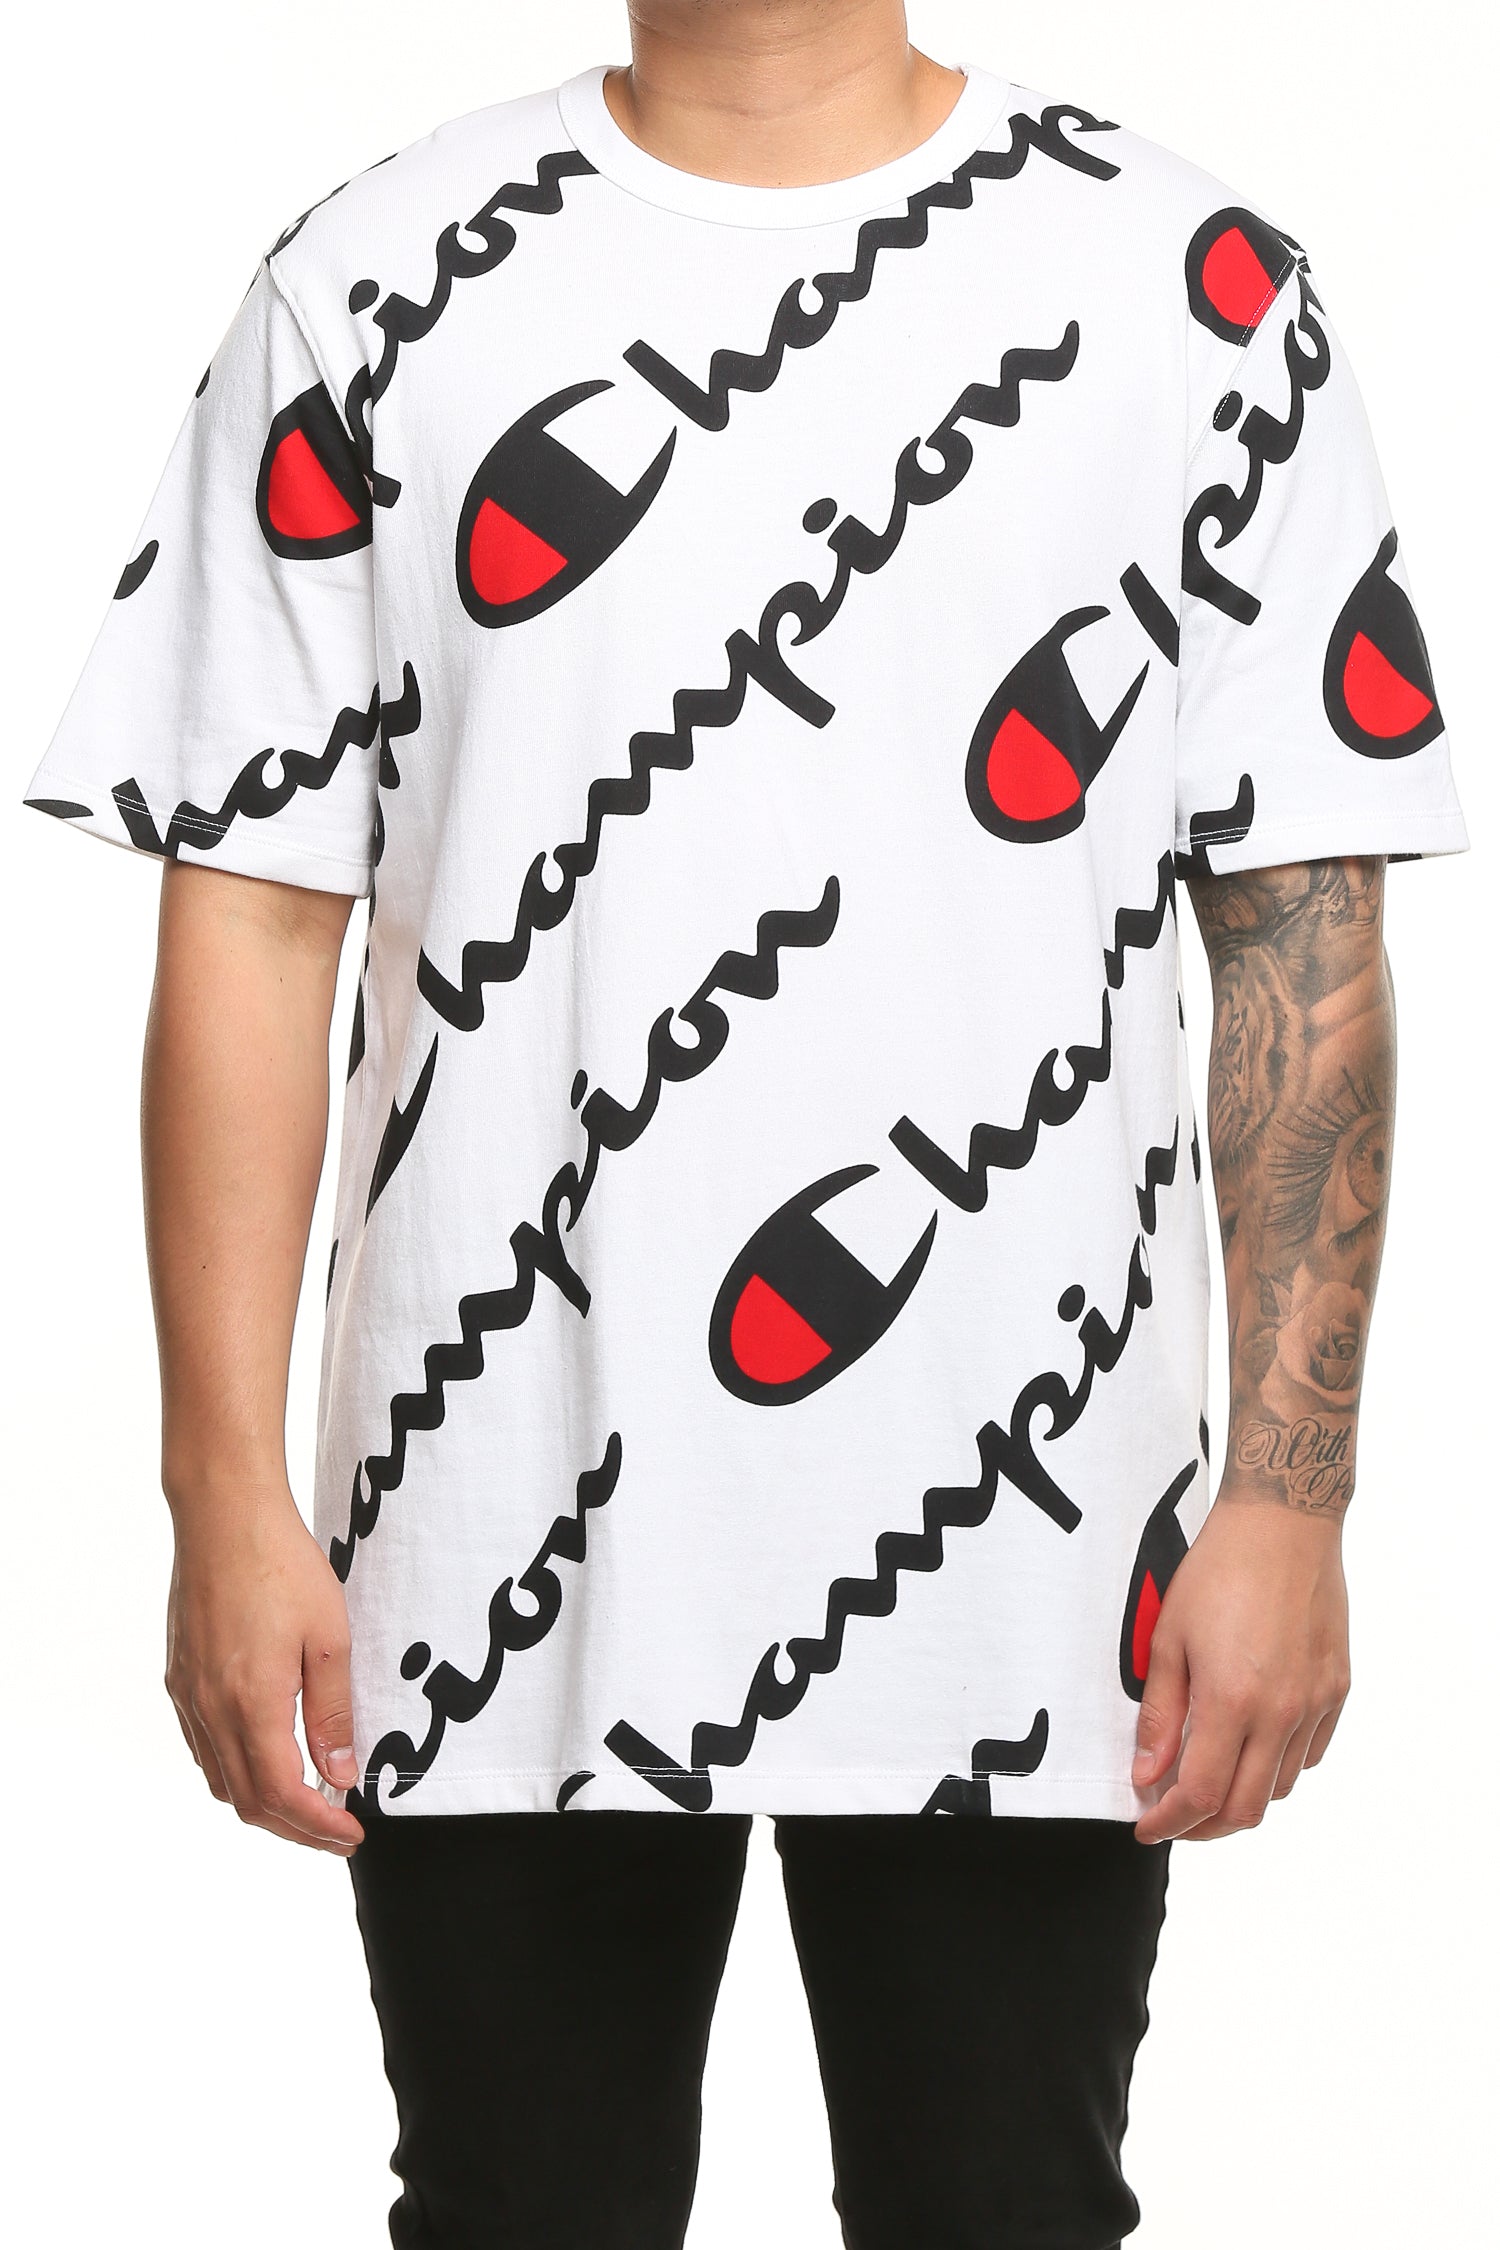 Champion Heritage All Over Script Tee 